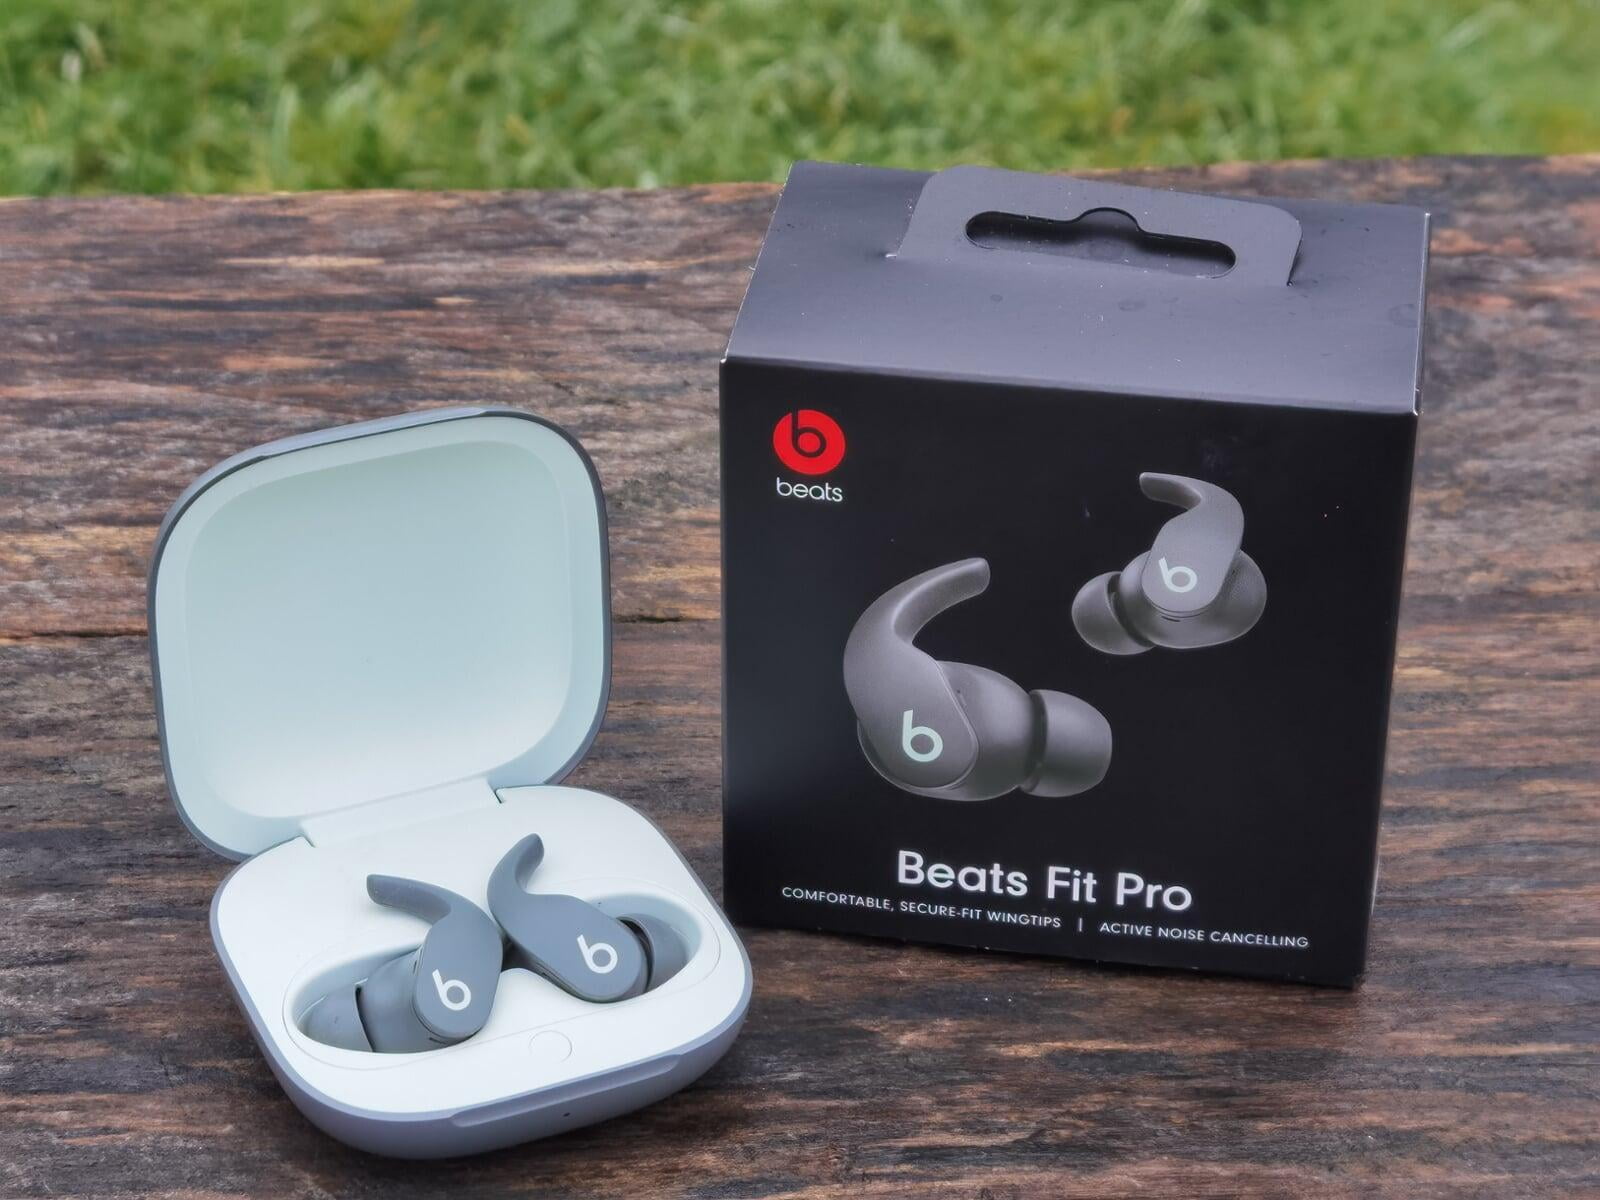 Beats Fit Pro Review - The best wireless headphone for jump rope fitness?